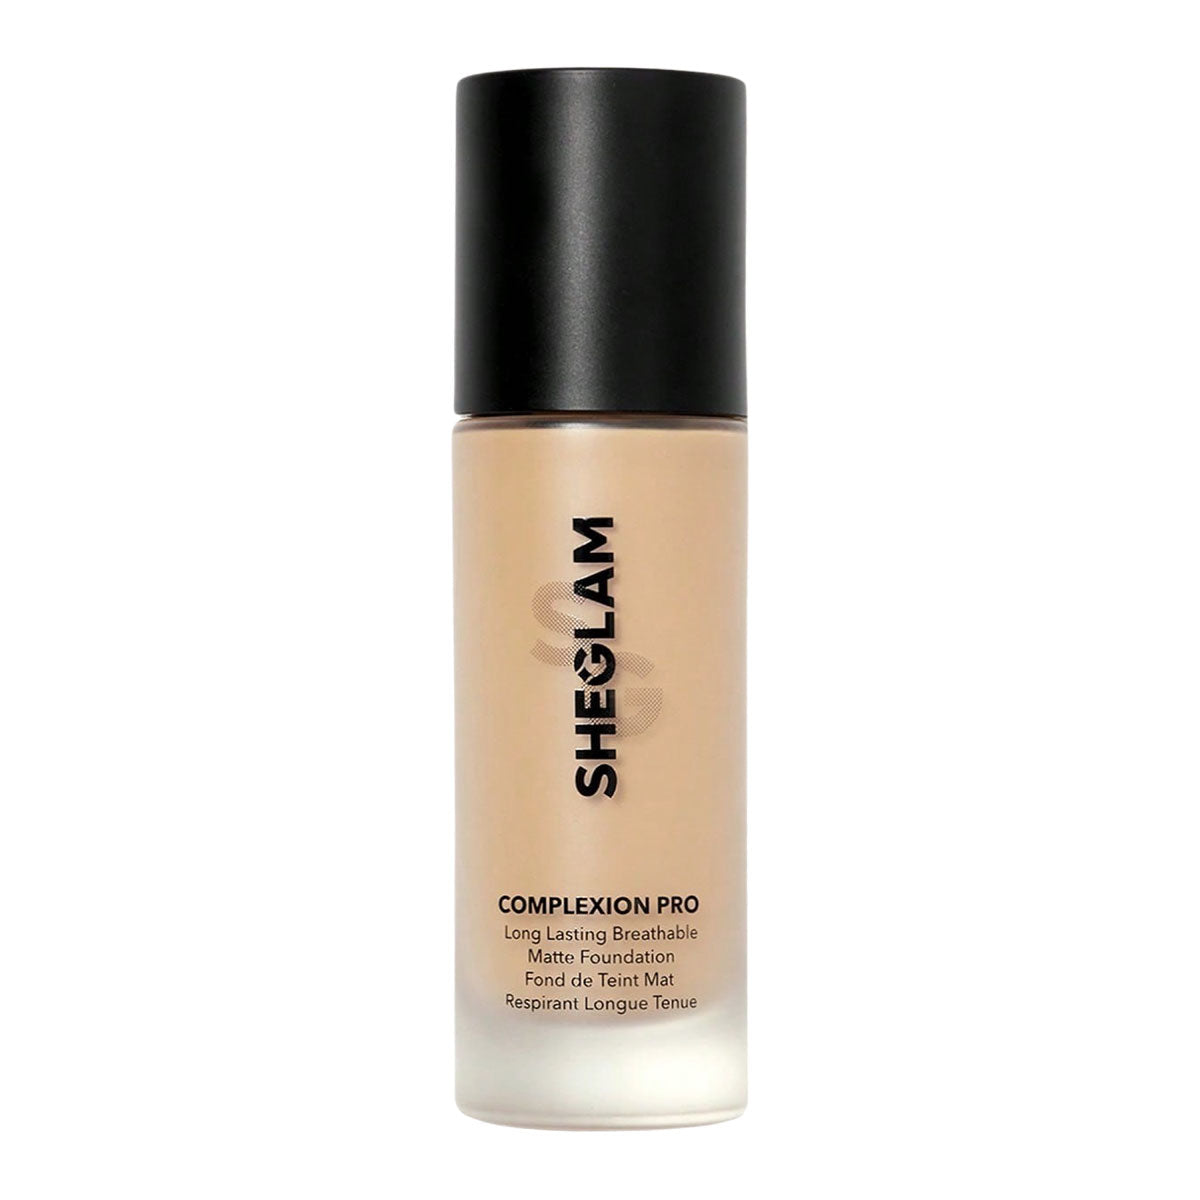 SheGlam Complexion Pro Long Lasting Breathable Matte Foundation 30 ml